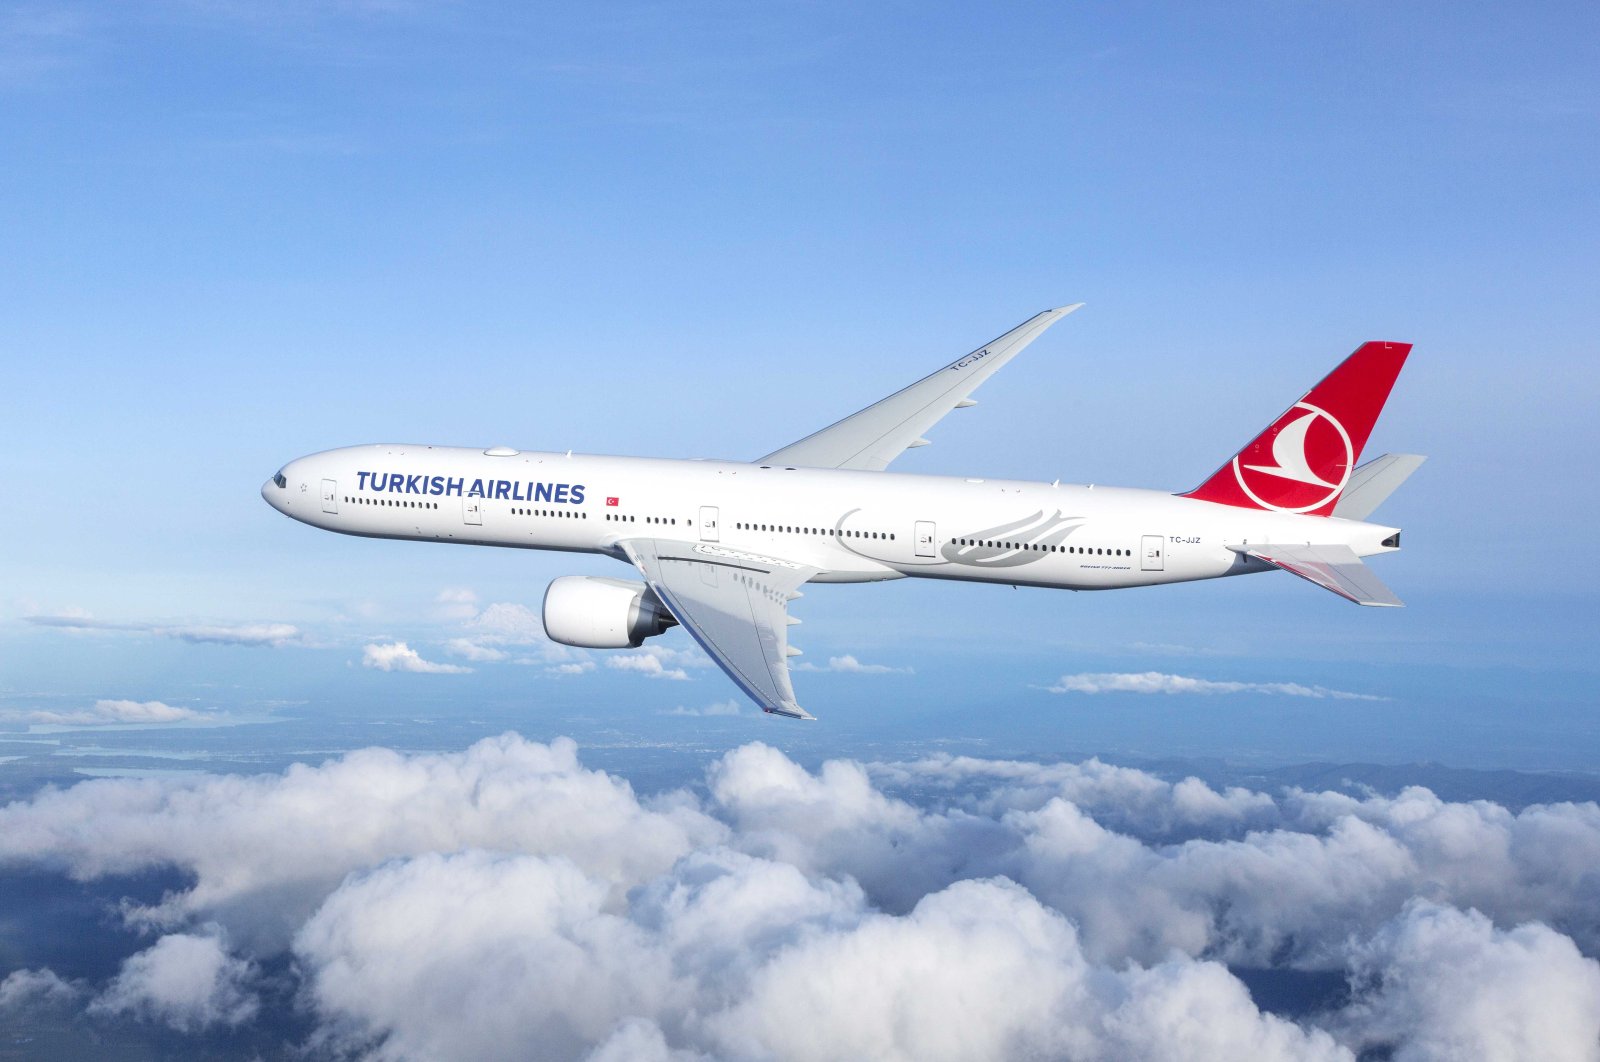 Turkish Airlines resumes flights to more locations, including Iran